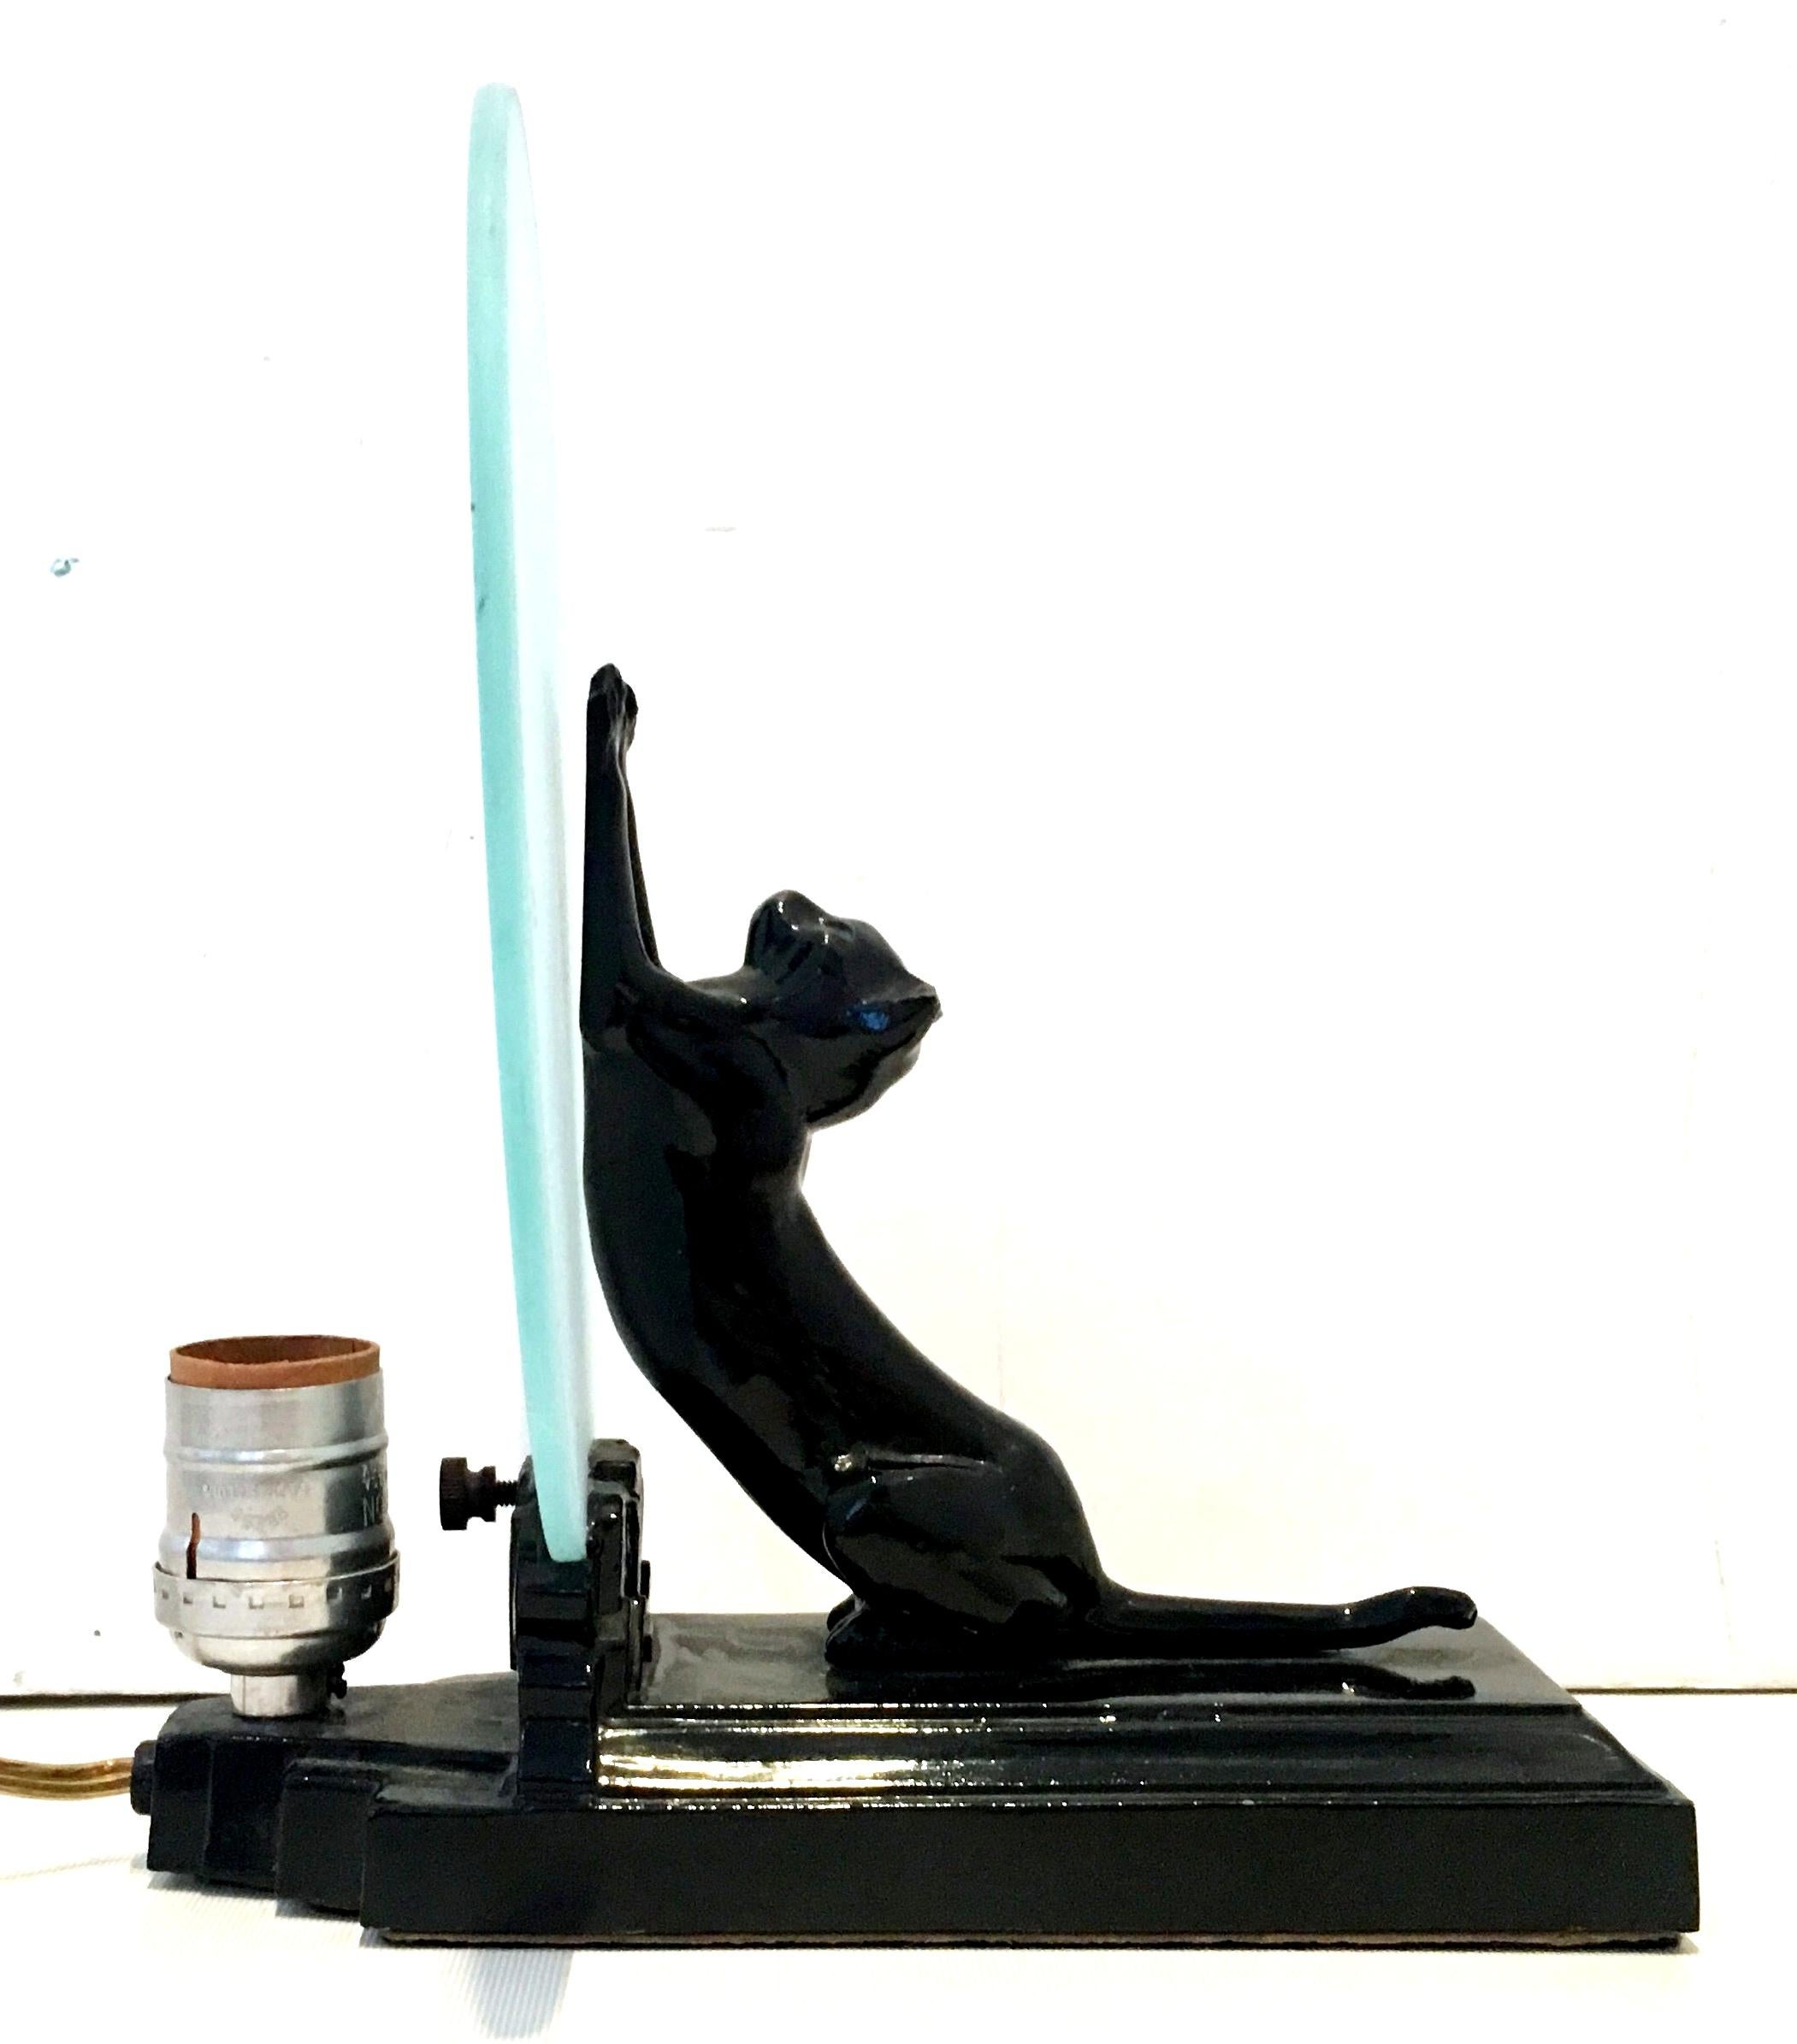 20th Century Art Deco style figural table lamp by Sarsaparilla's. The lamp is comprised of a jet black cast metal base with a figural sculptural cat/panther of approximately 7